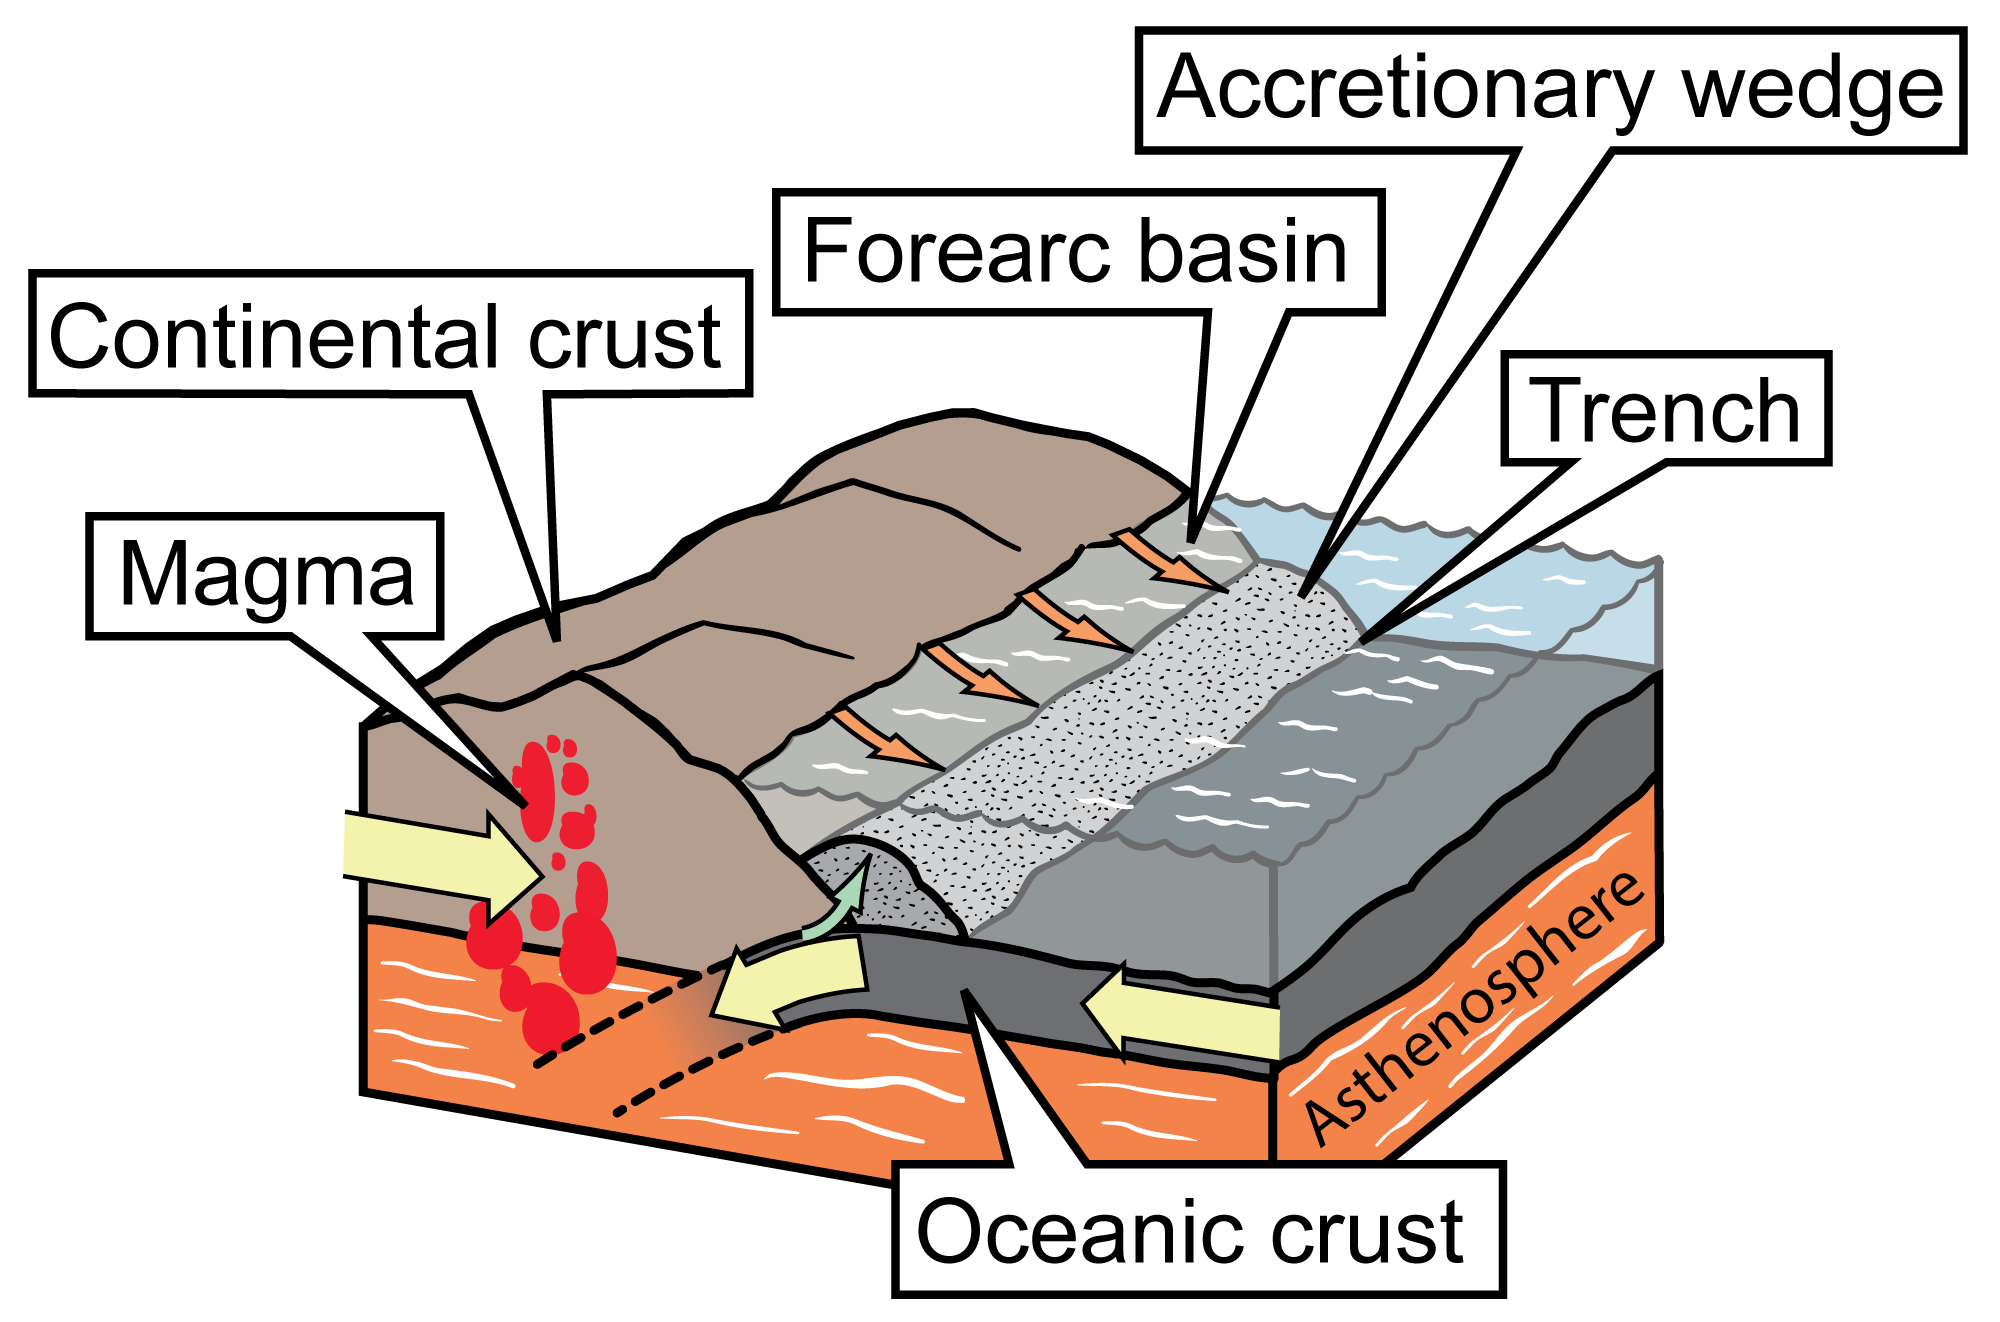 Simple diagram showing a subduction zone between a continental and oceanic plate. As the oceanic plate is subducted, magma forms at its melting edge. An accretionary wedge develops where the oceanic plate scrapes against the continental plate.